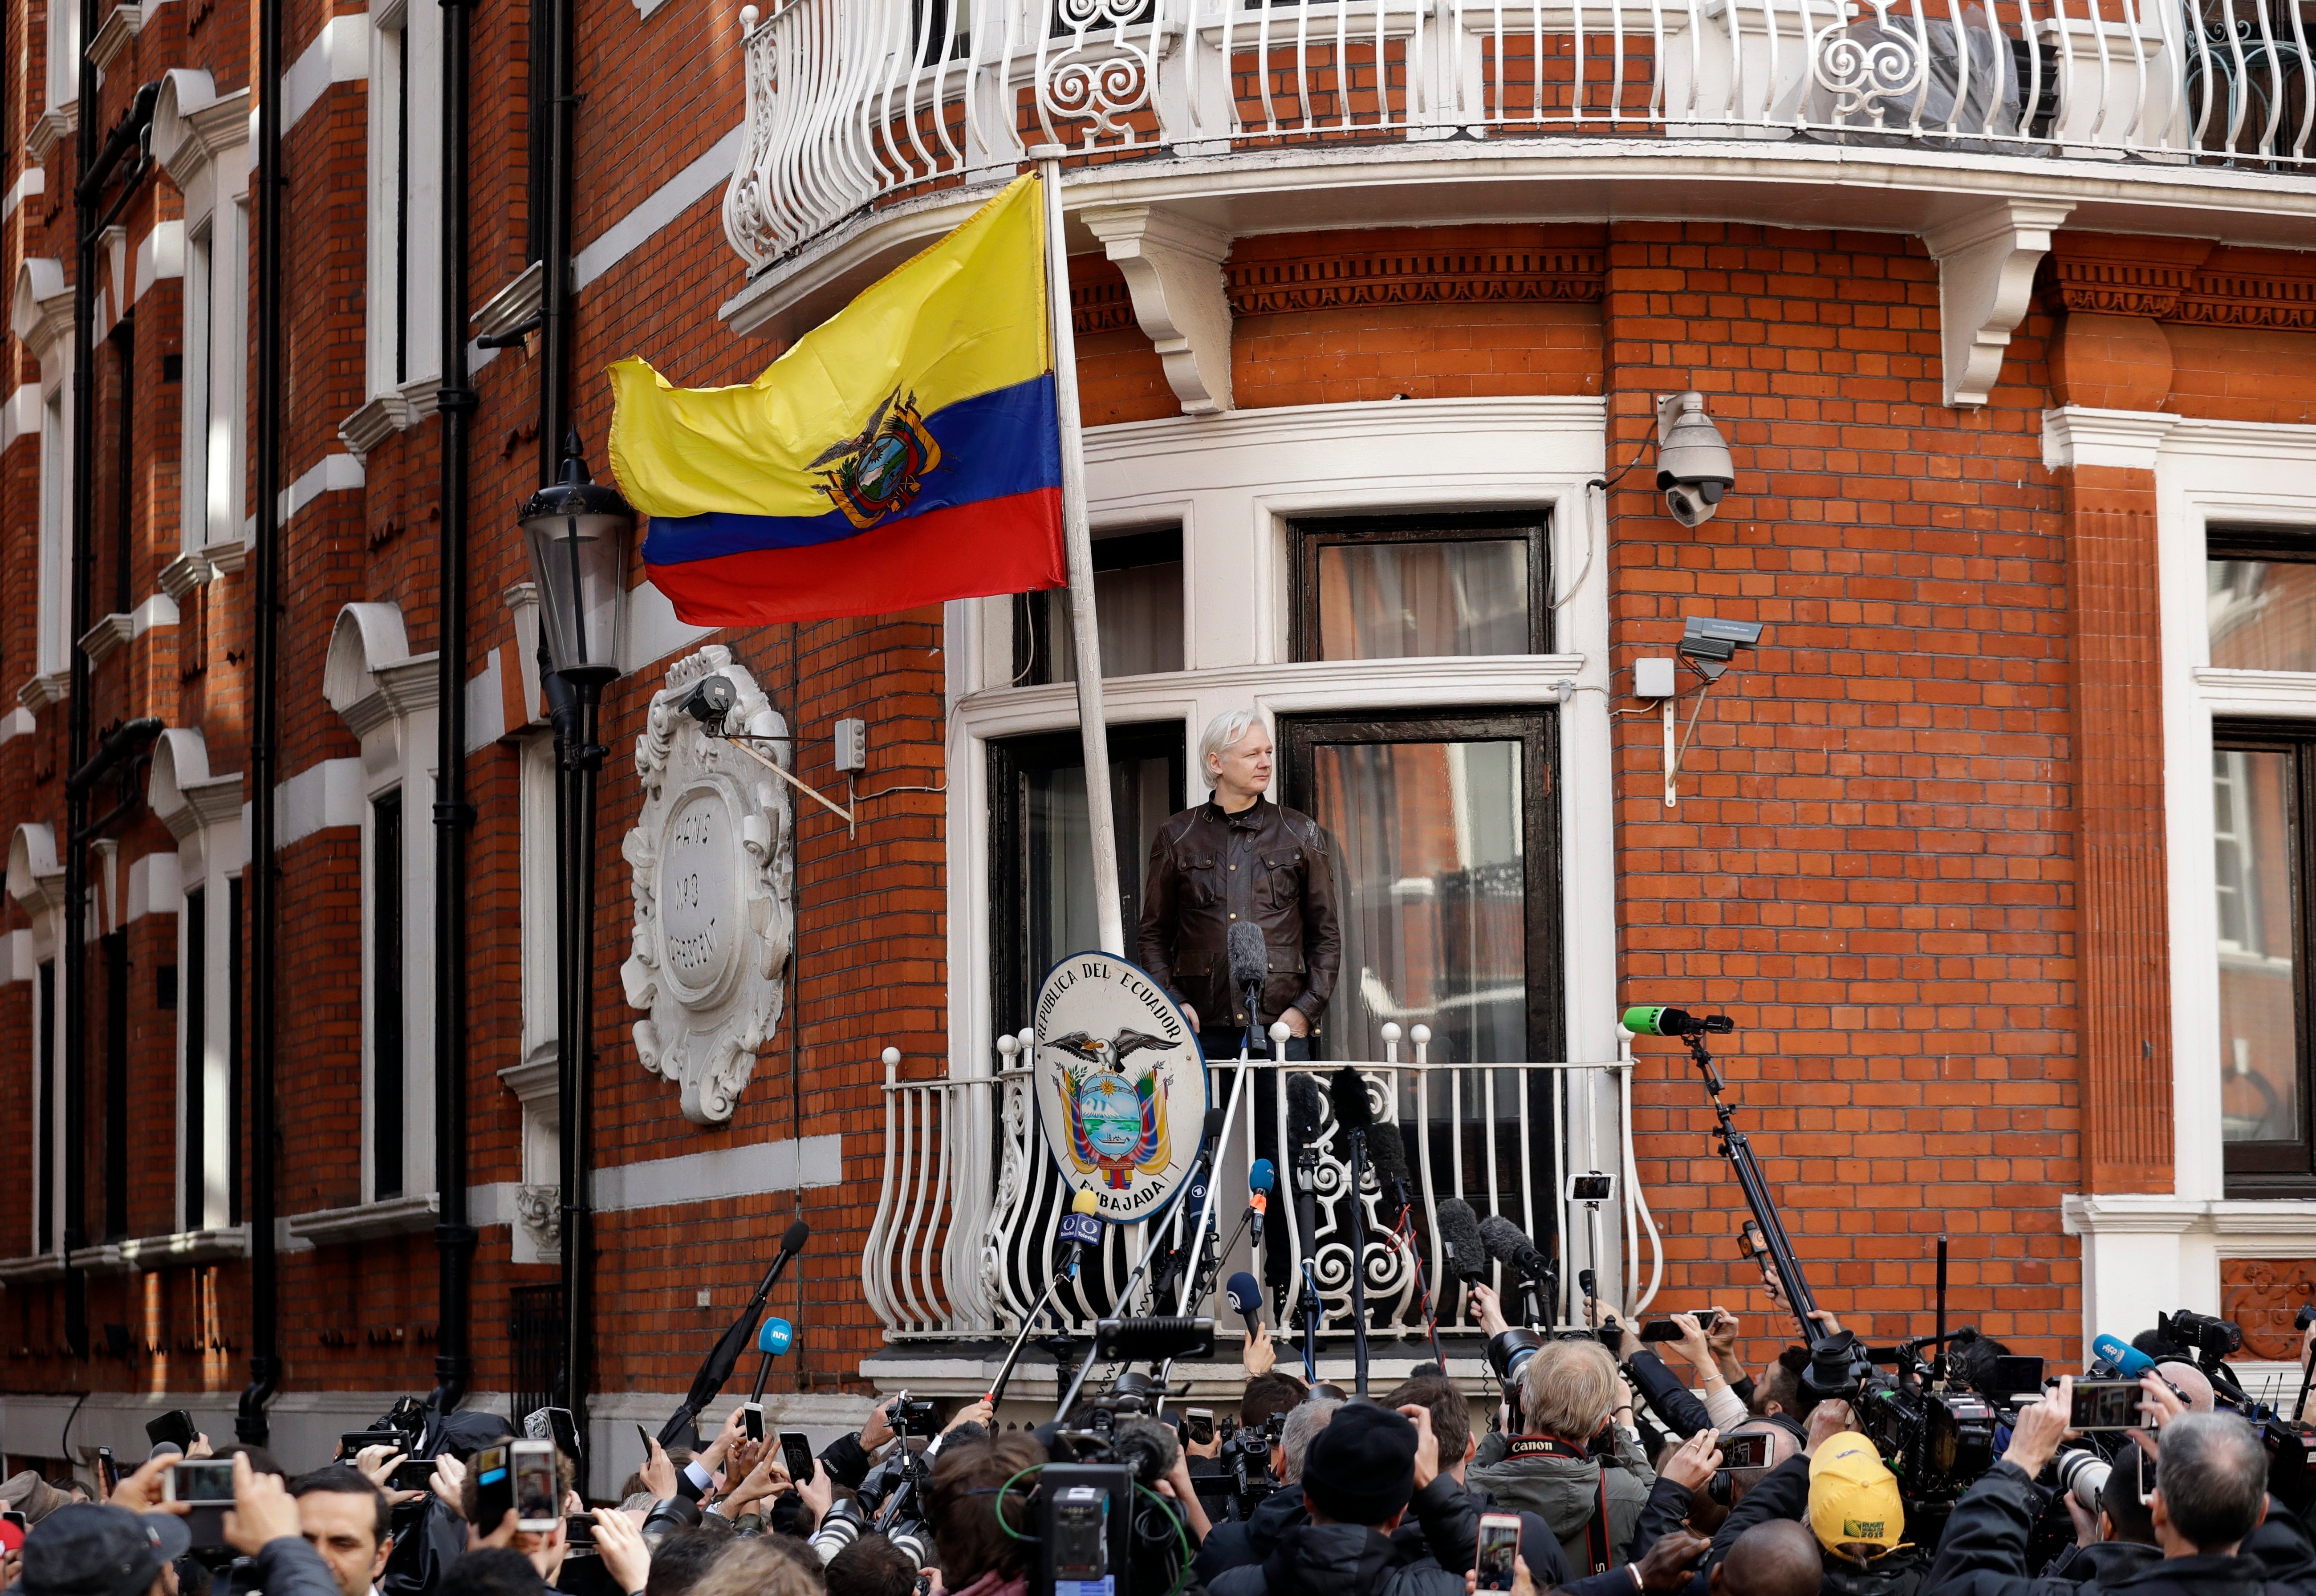 WikiLeaks founder Julian Assange gestures on the balcony of the Ecuadorian embassy prior to speaking, in London,